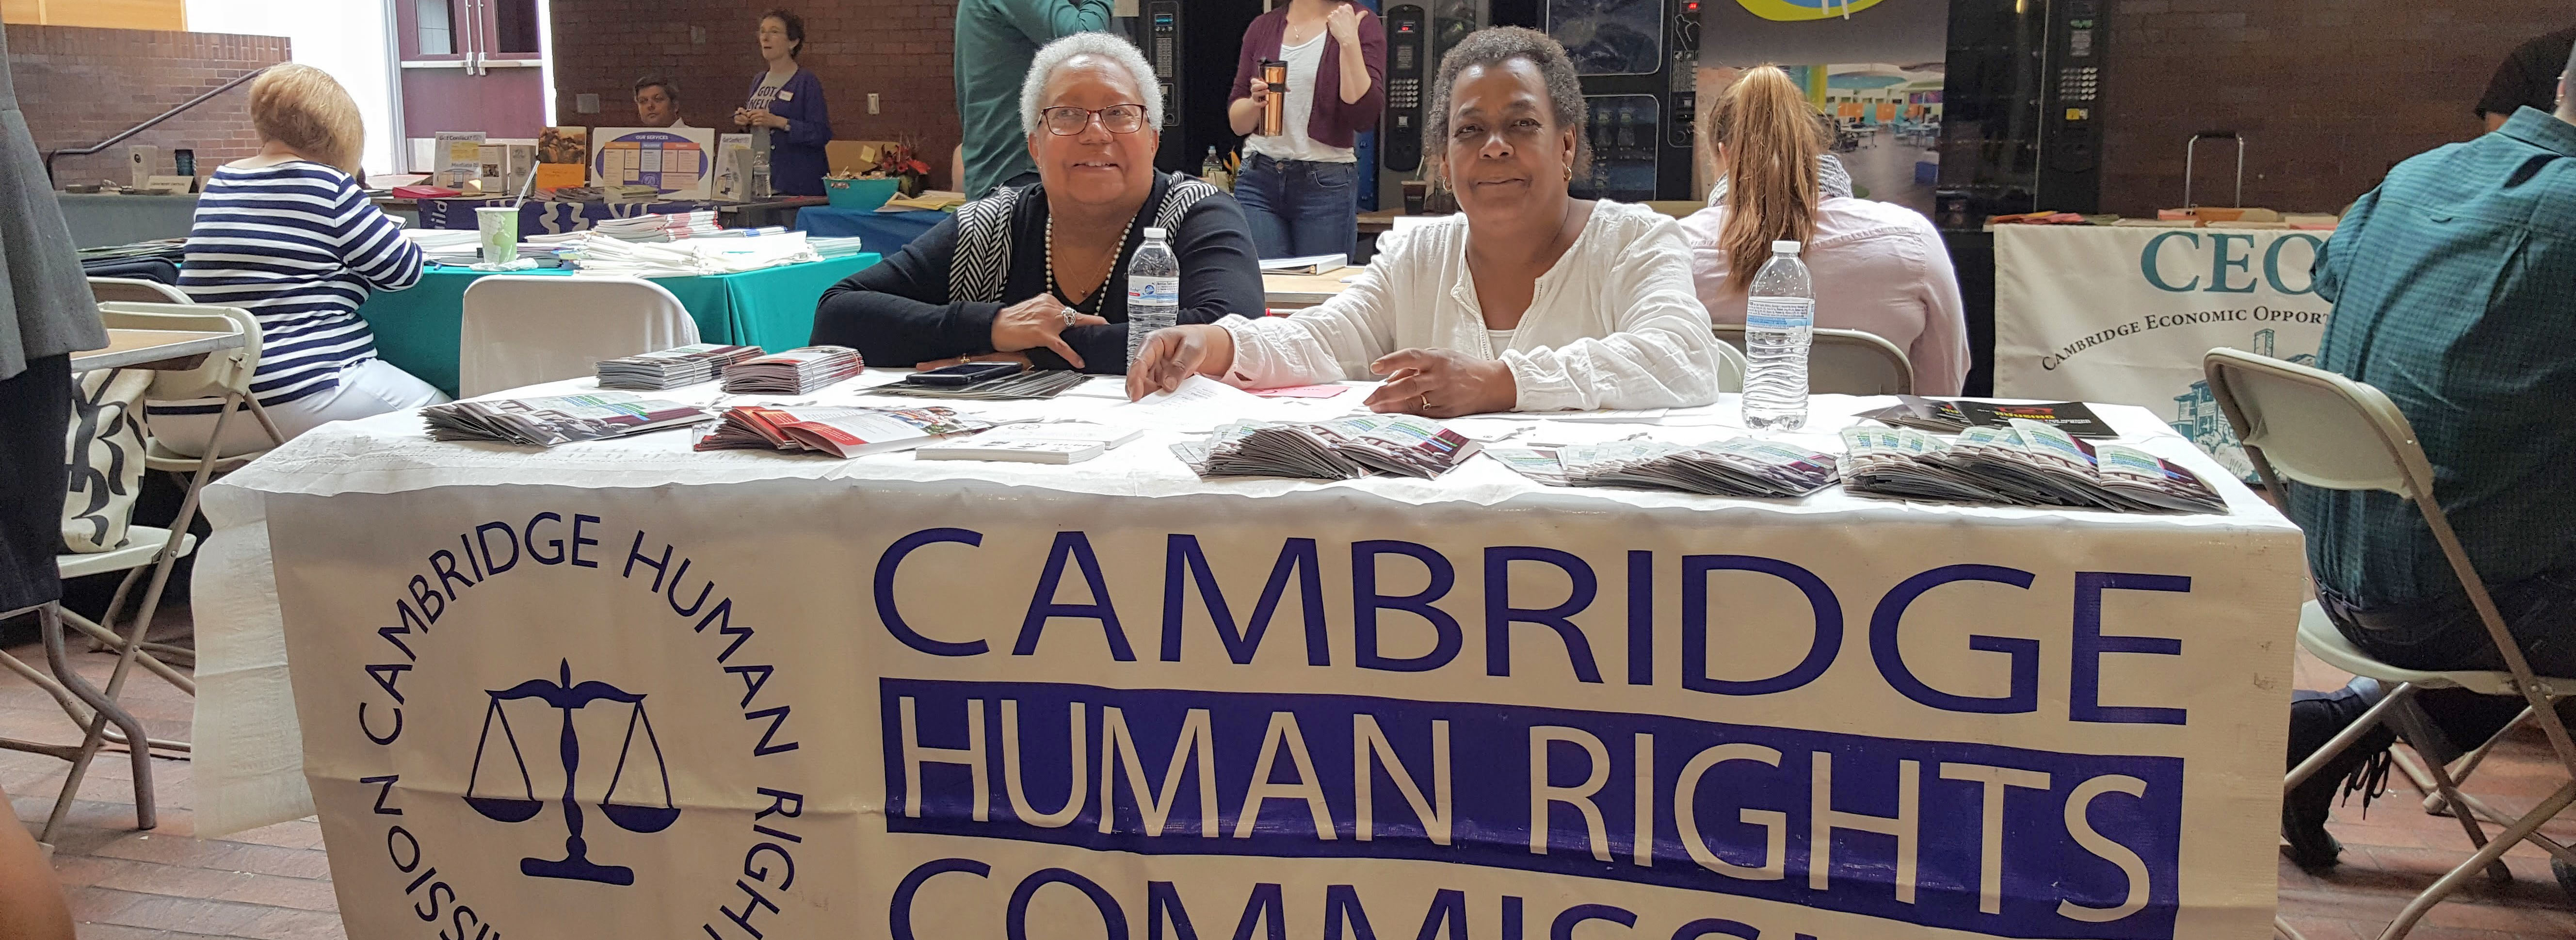 Human Rights Commission - City of Cambridge, MA